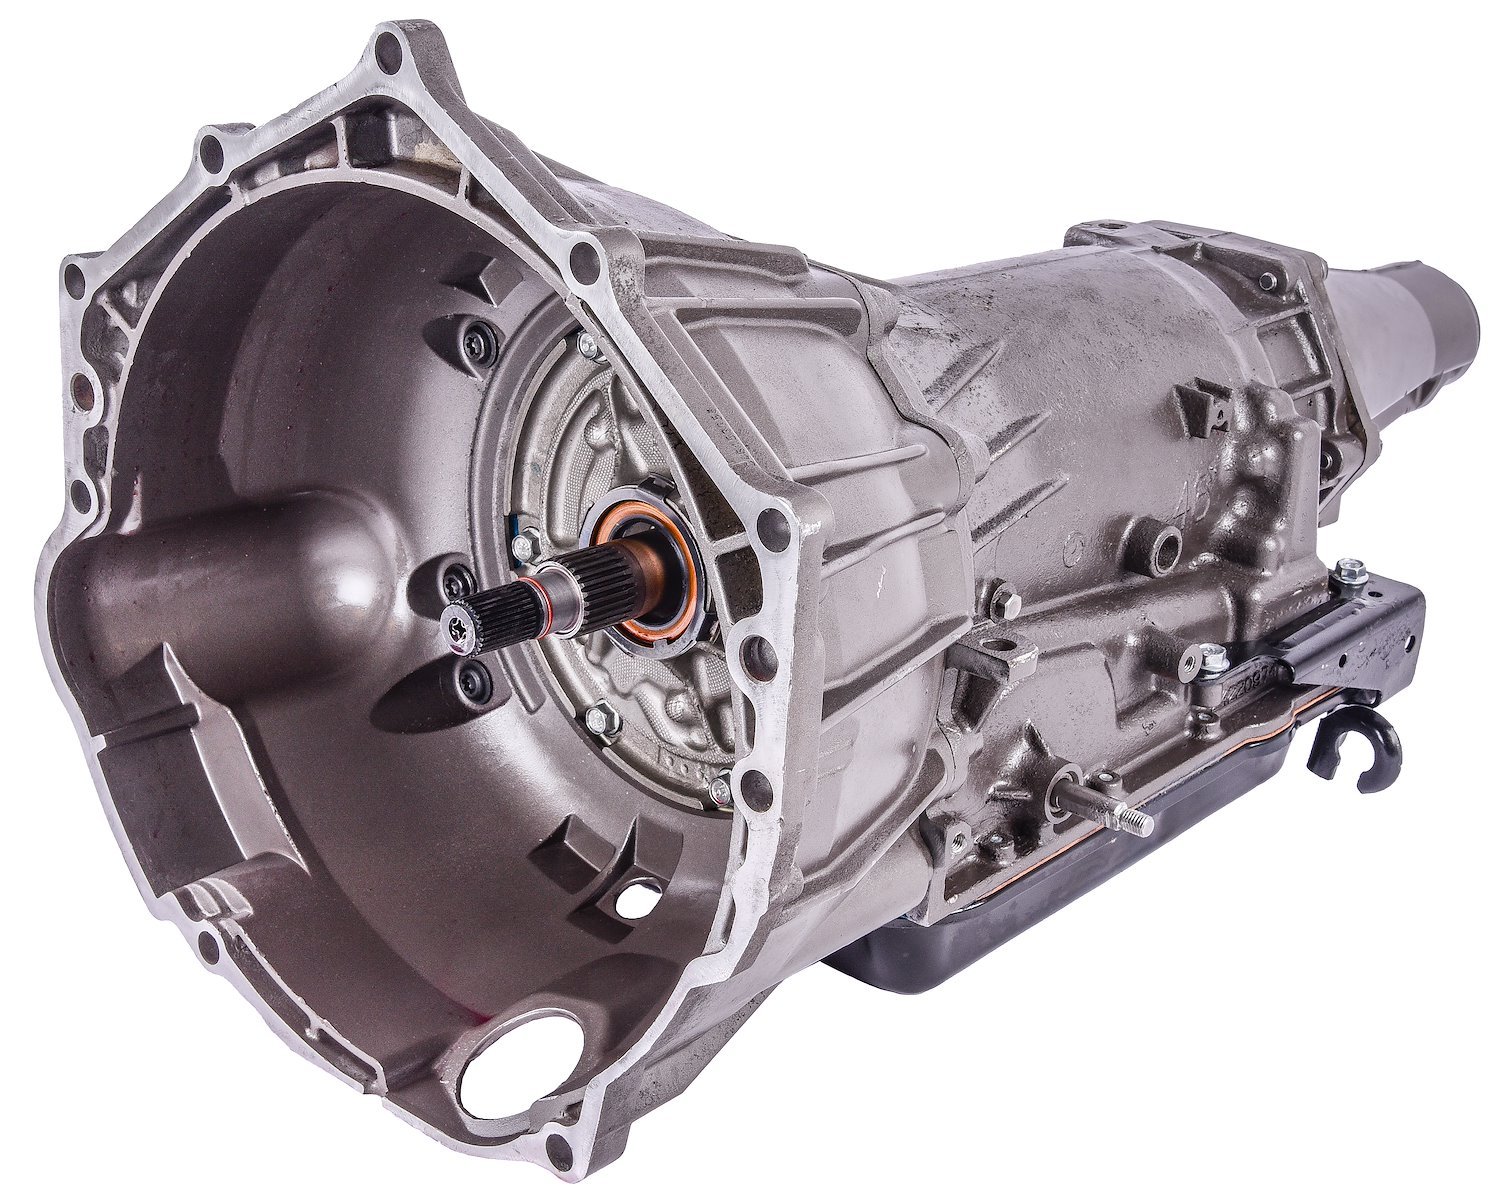 4L60E Performance Transmission for 2005 & Earlier GM LS Engines